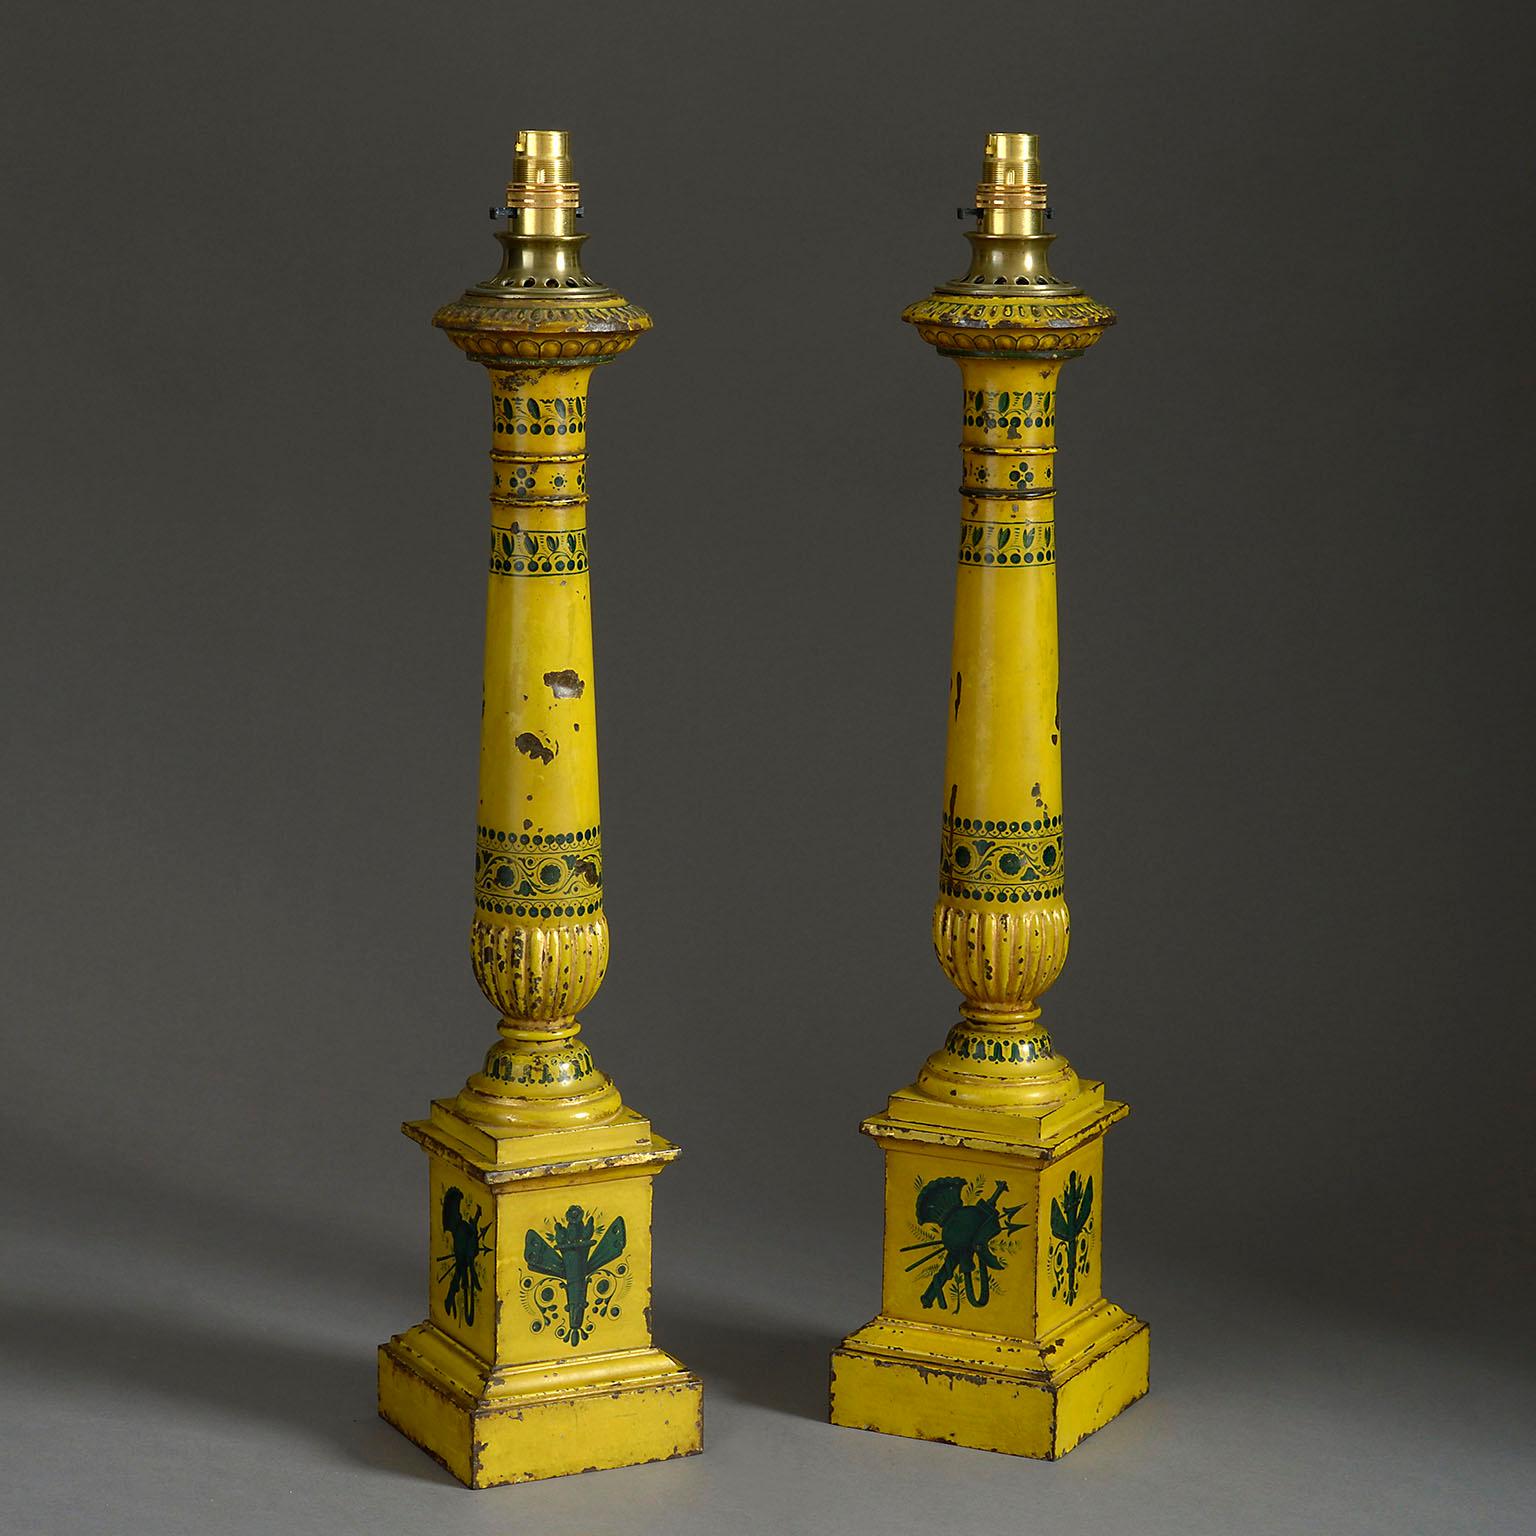 A pair of 19th century tole lamps in the form of columns decorated with bands of stylized flowers and standing on moulded plinth bases decorated with panels of military trophies in shades of petrol blue on a butter yellow ground, wired with silk